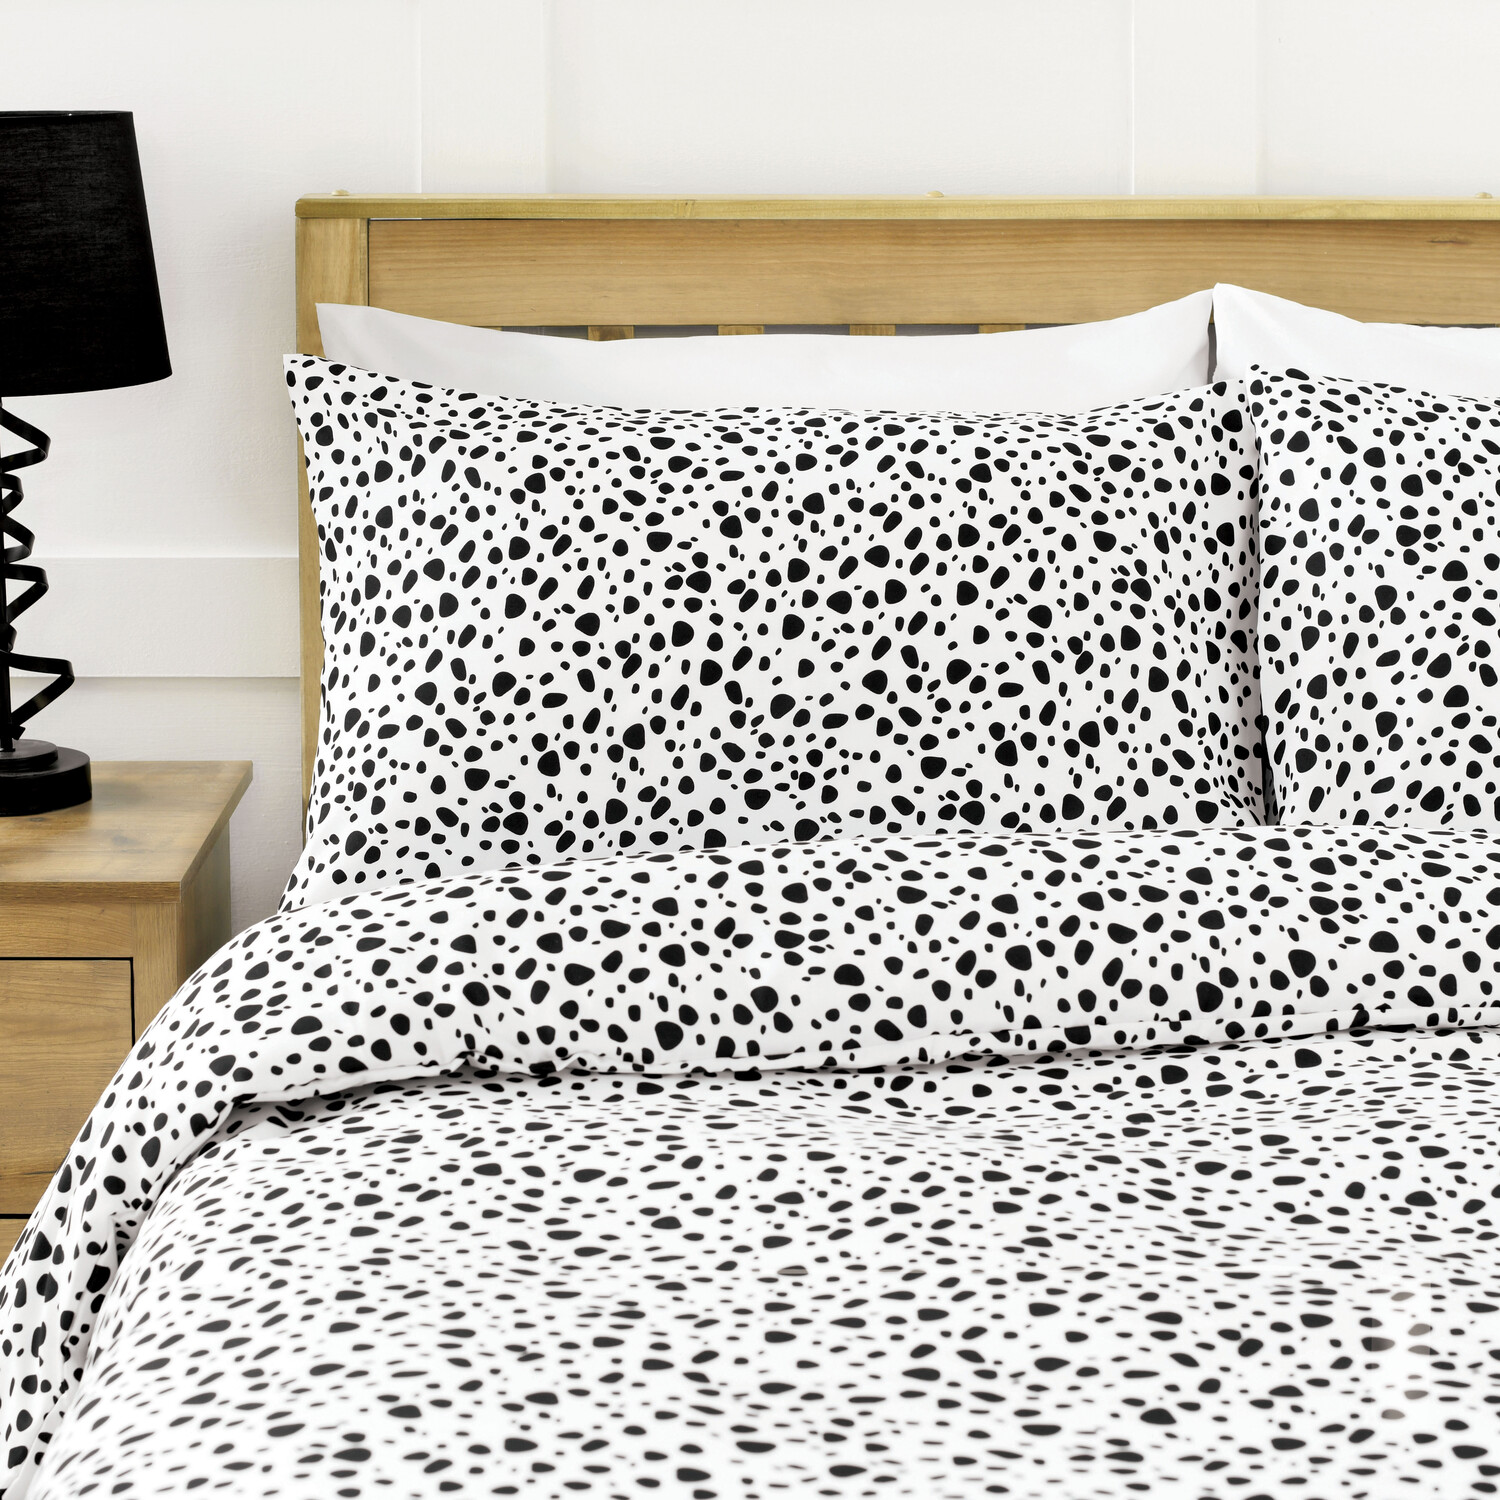 My Home Dottie King Size Monochrome Duvet Cover and Pillowcase Set Image 3